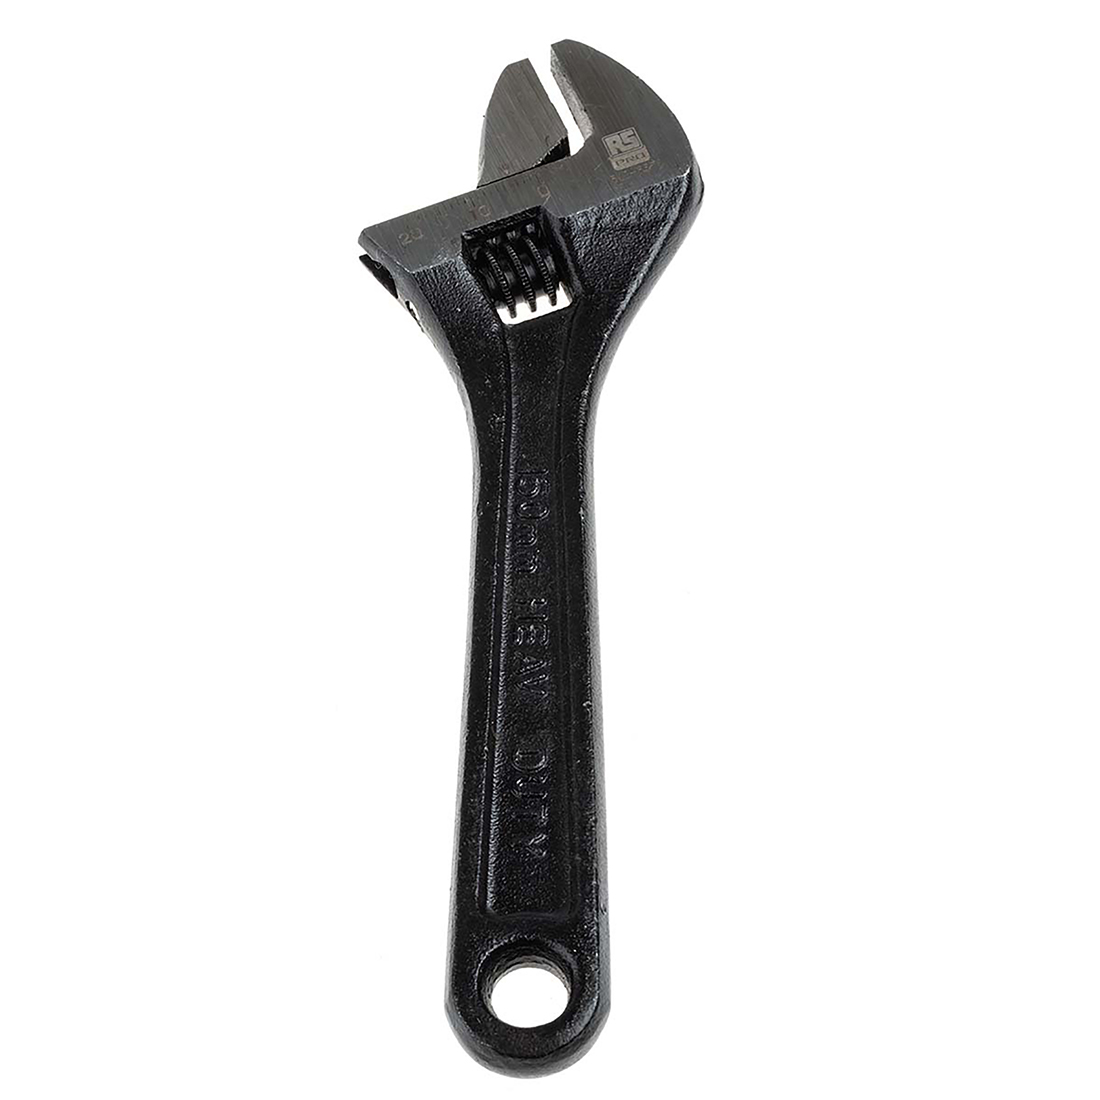 RS PRO Adjustable Spanner, 152.4 mm Overall Length, 20mm Max Jaw Capacity